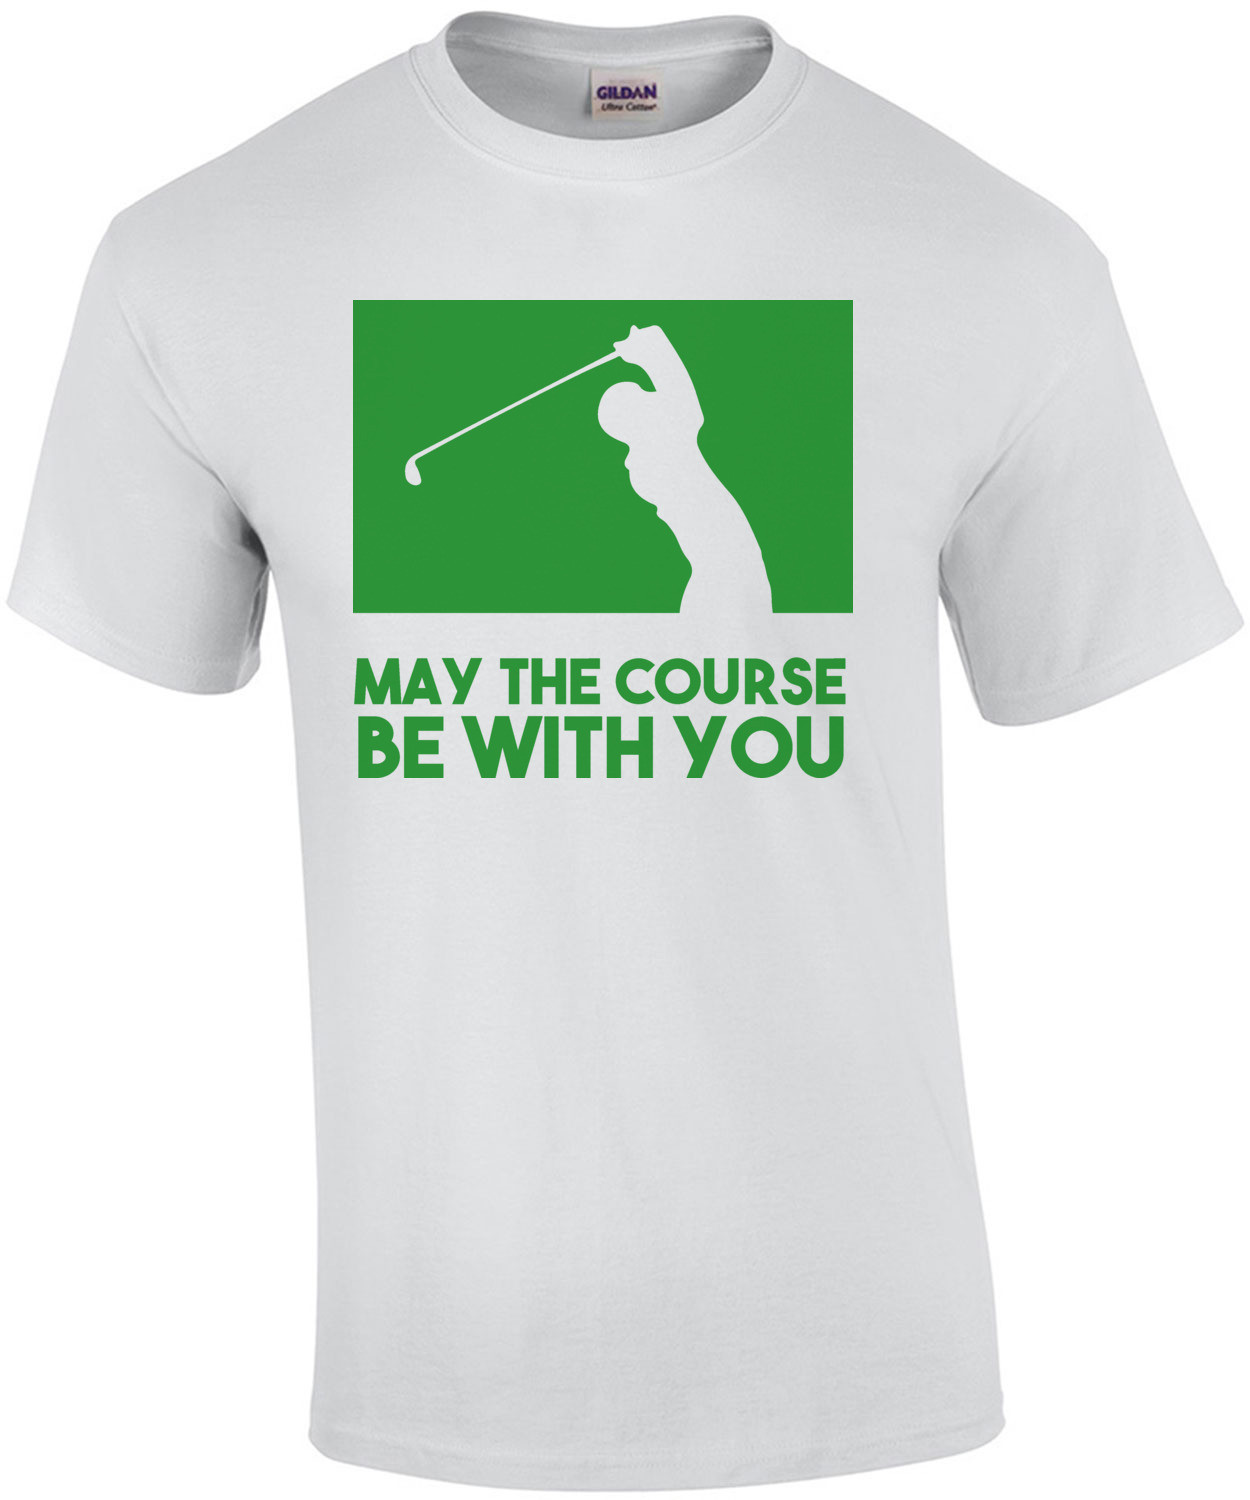 May the course be with you - Golf T-Shirt